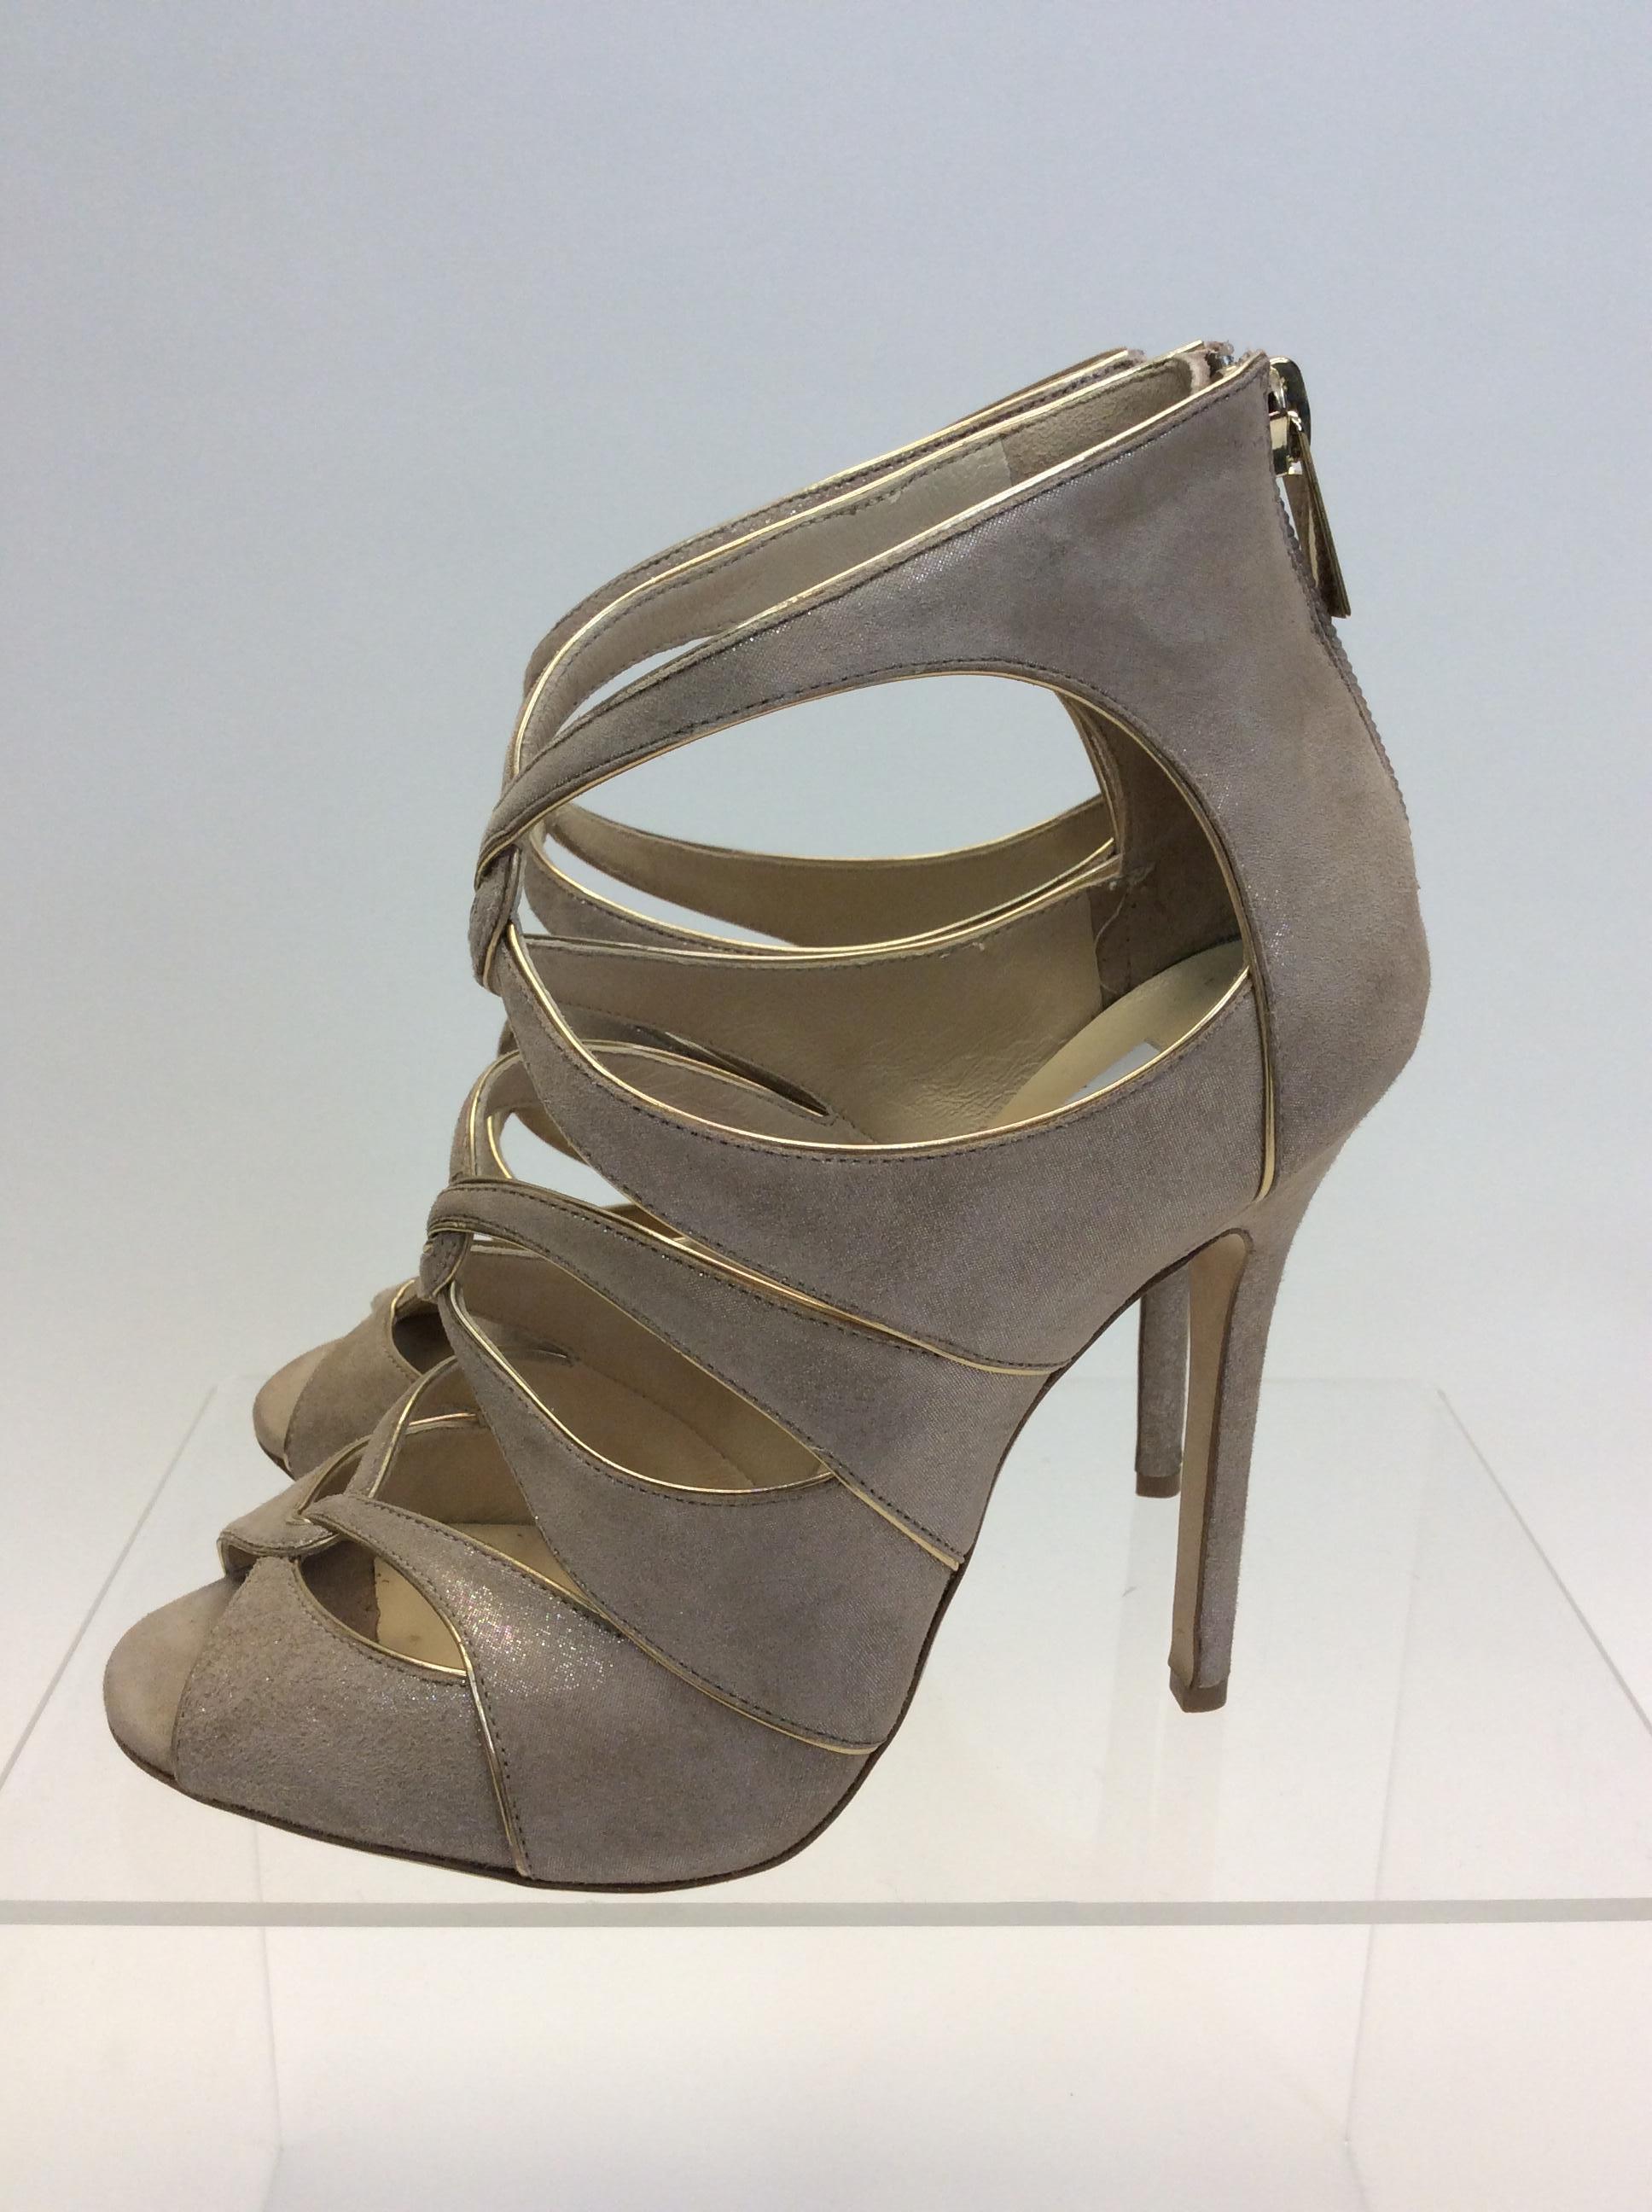 Gray Jimmy Choo Gold and Tan Heels For Sale